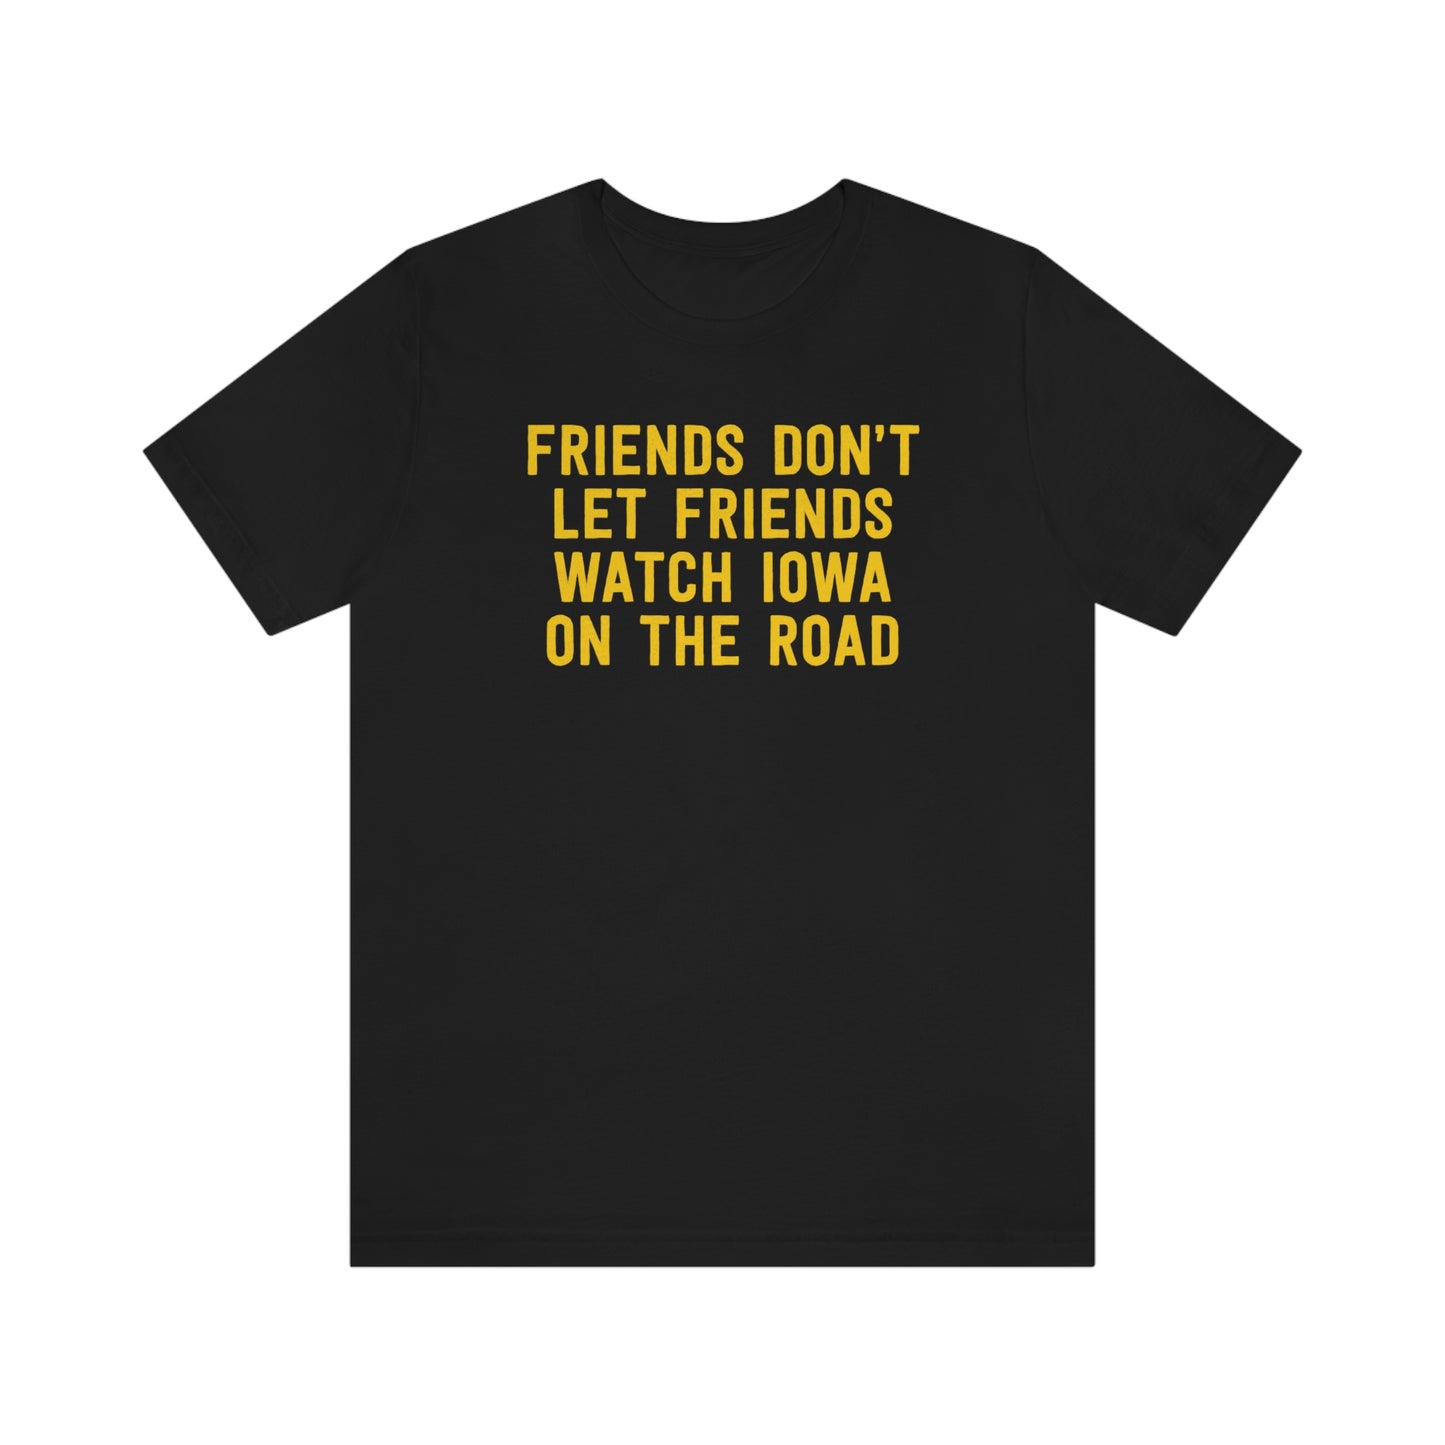 Friends Don't Let Friends Watch Iowa On The Road Shirt - Black and Gold